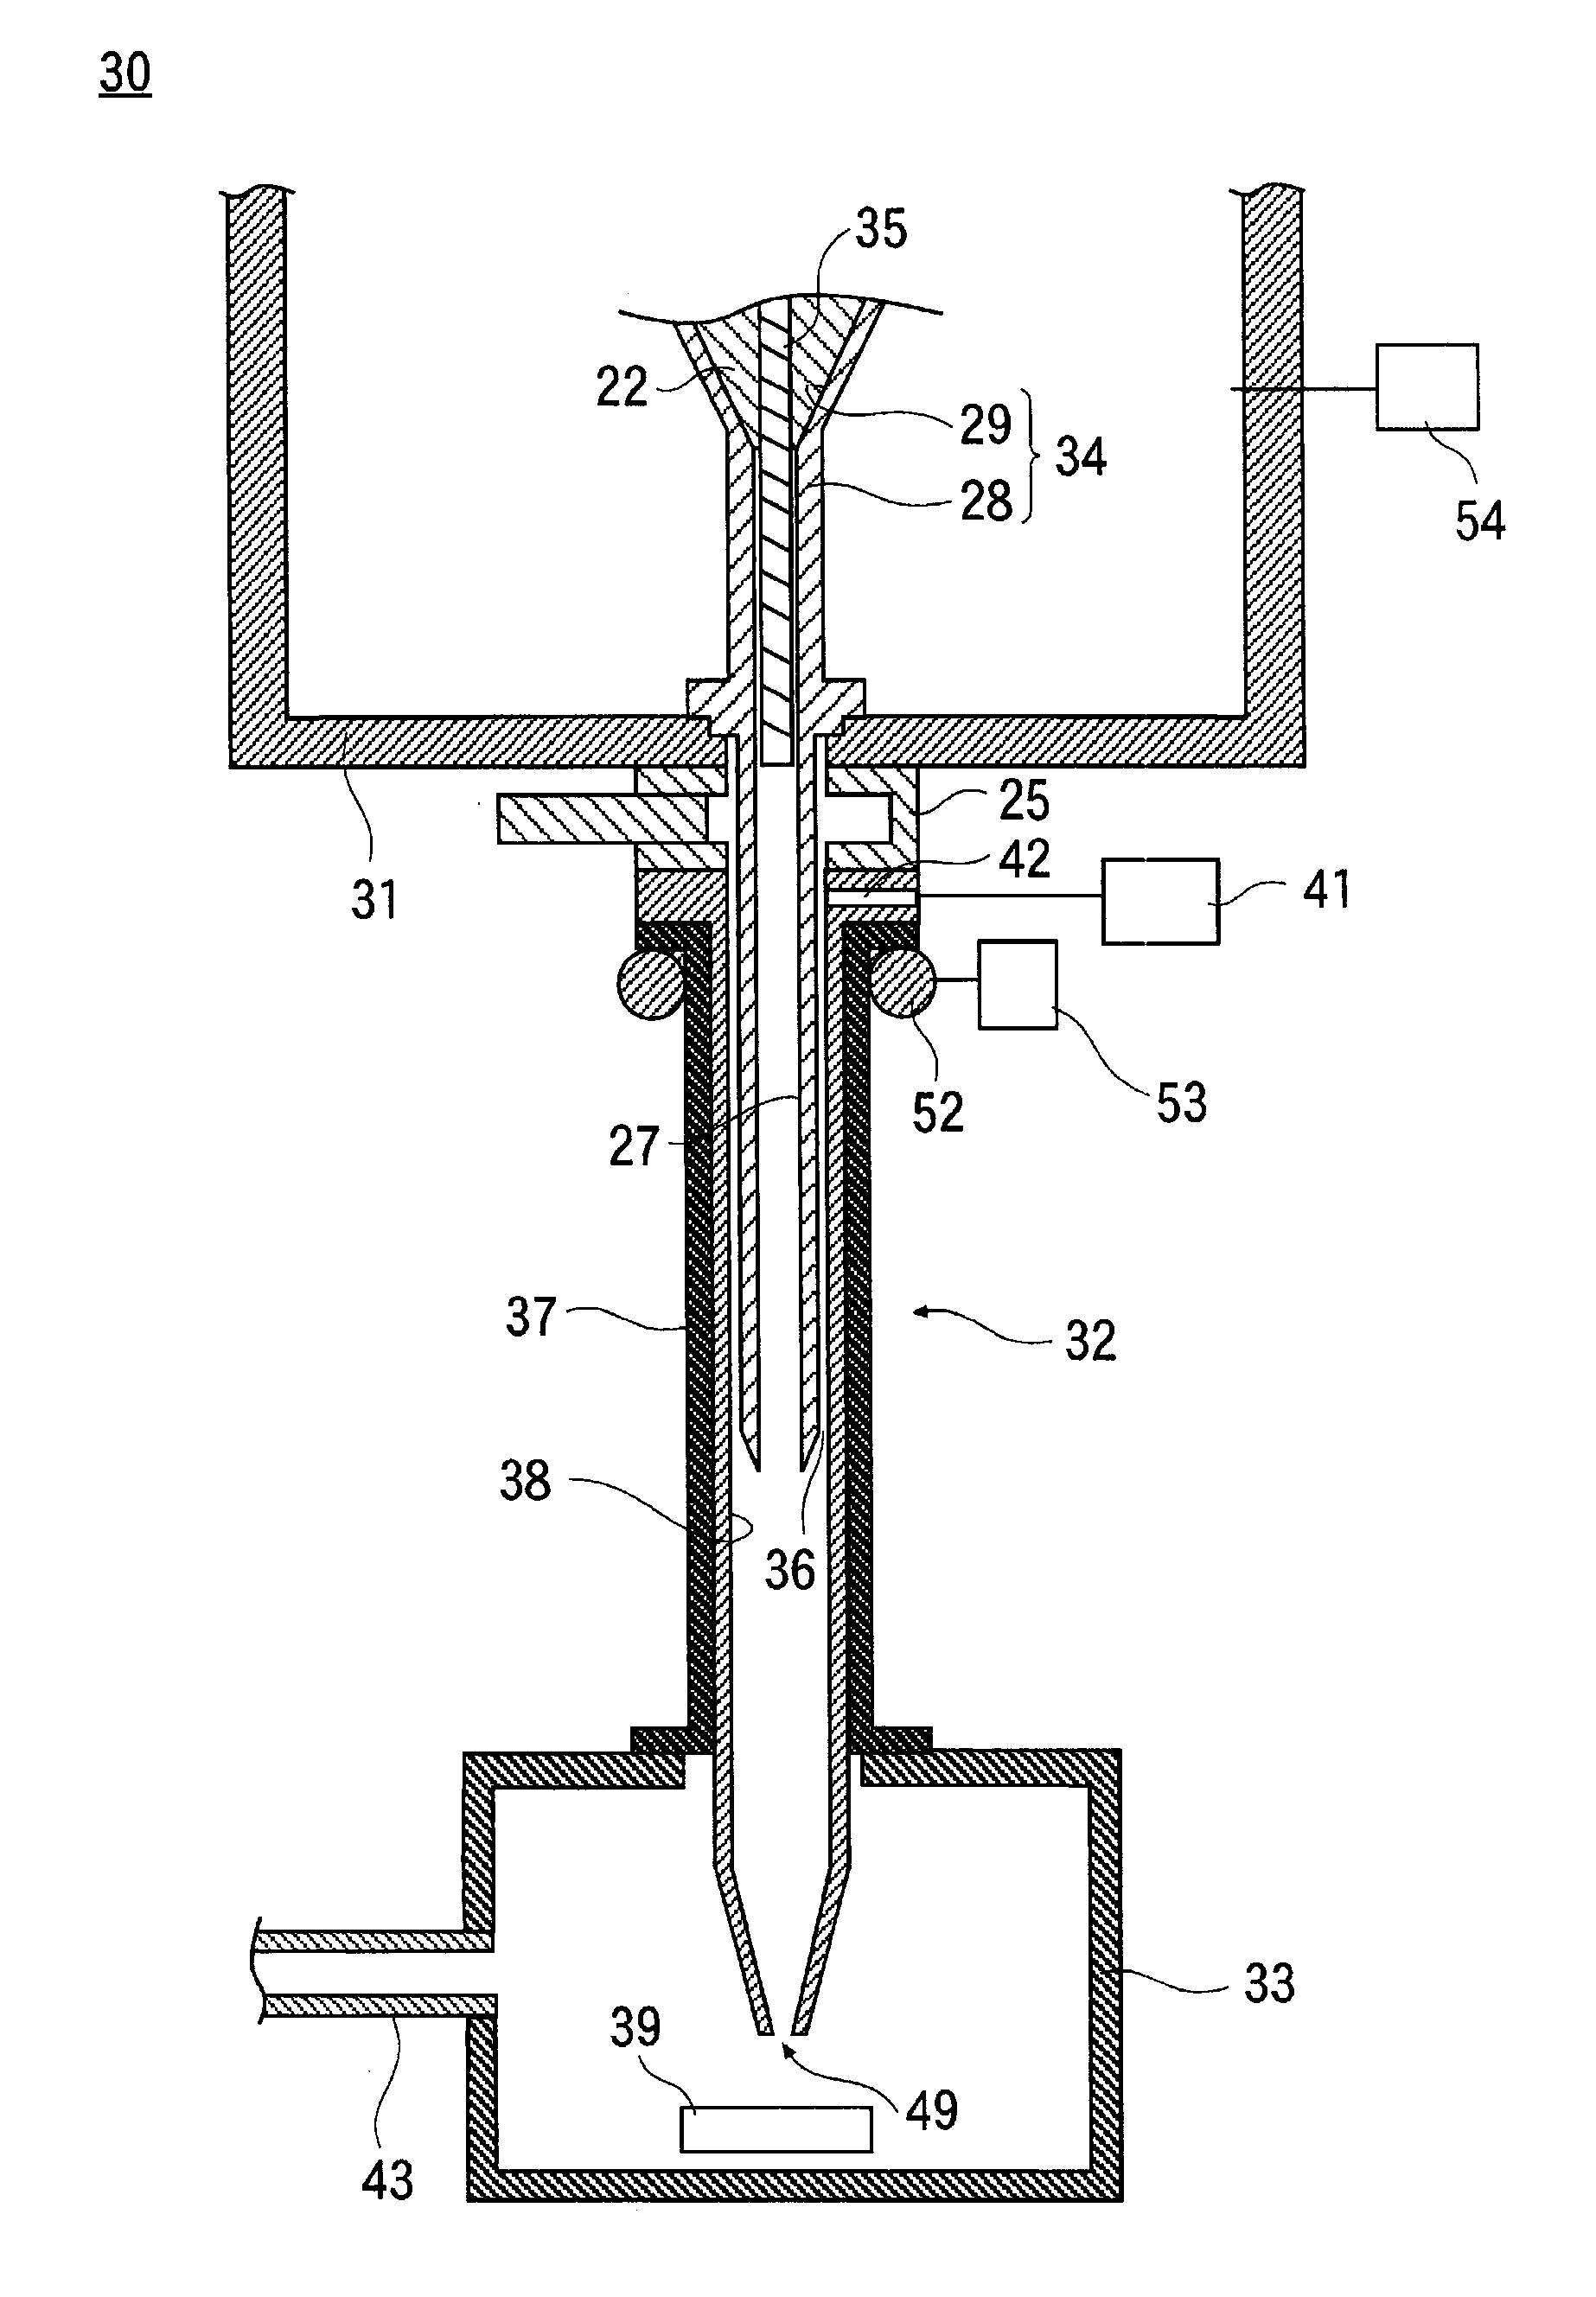 Organic compound steam generator and apparatus for producing organic thin film